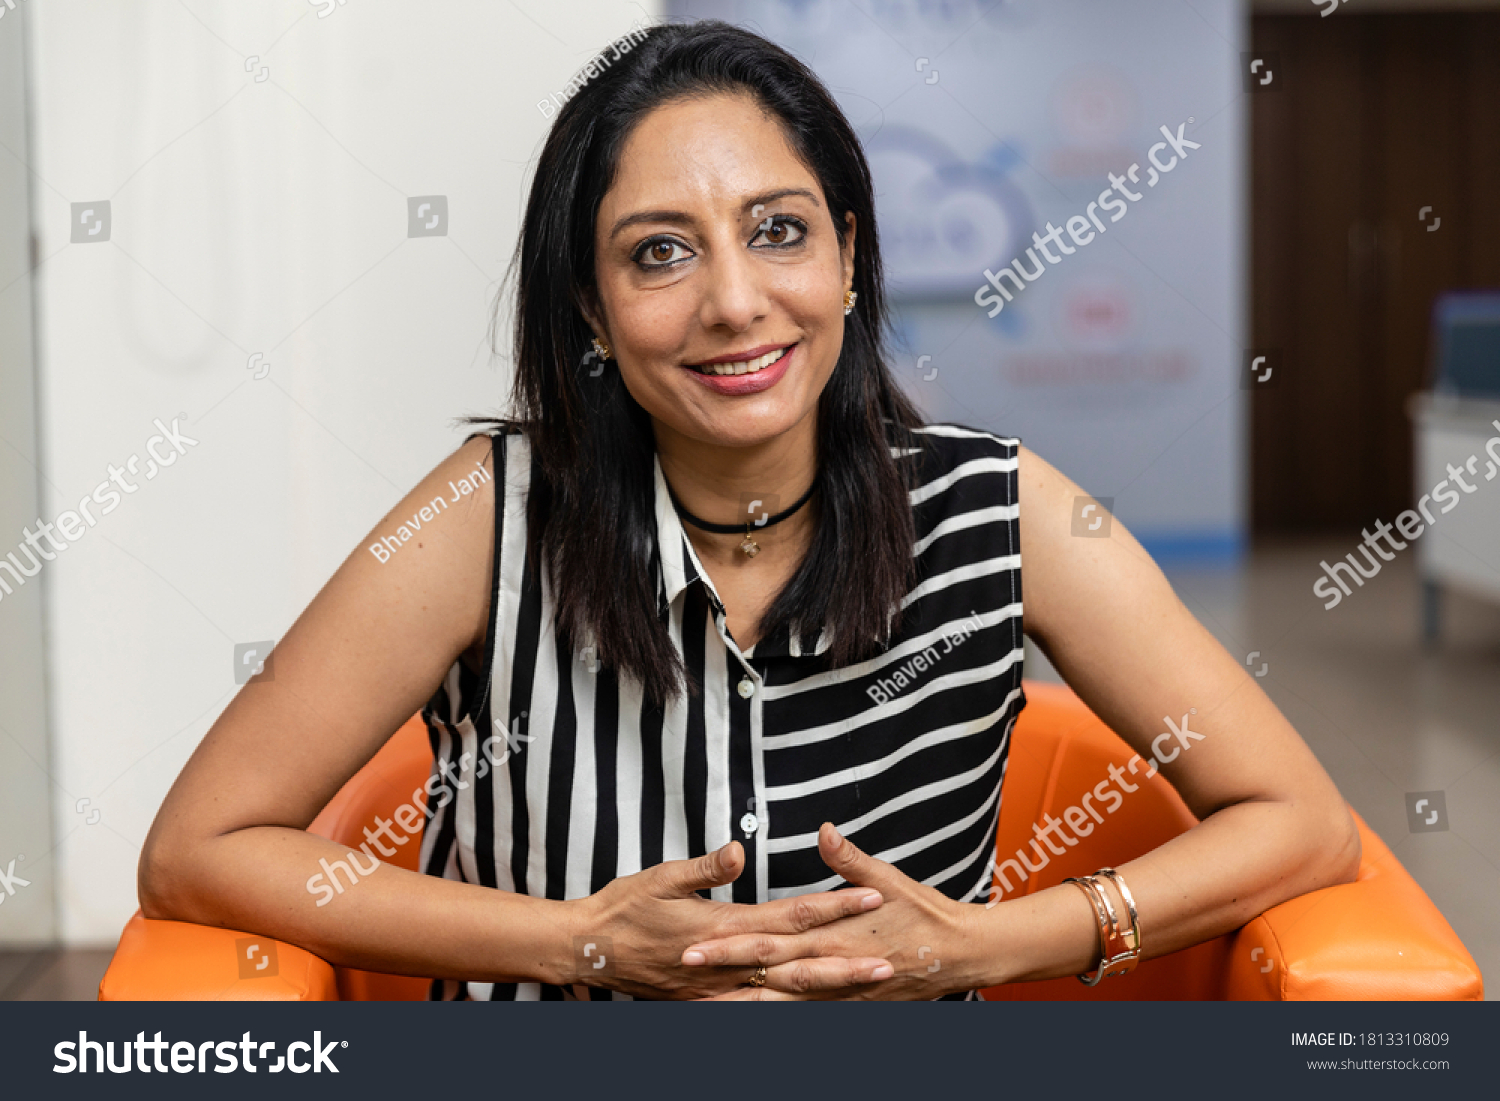 Portrait of smiling Indian business woman sitting on a couch and looking into camera, Corporate environment, smiling face. #1813310809